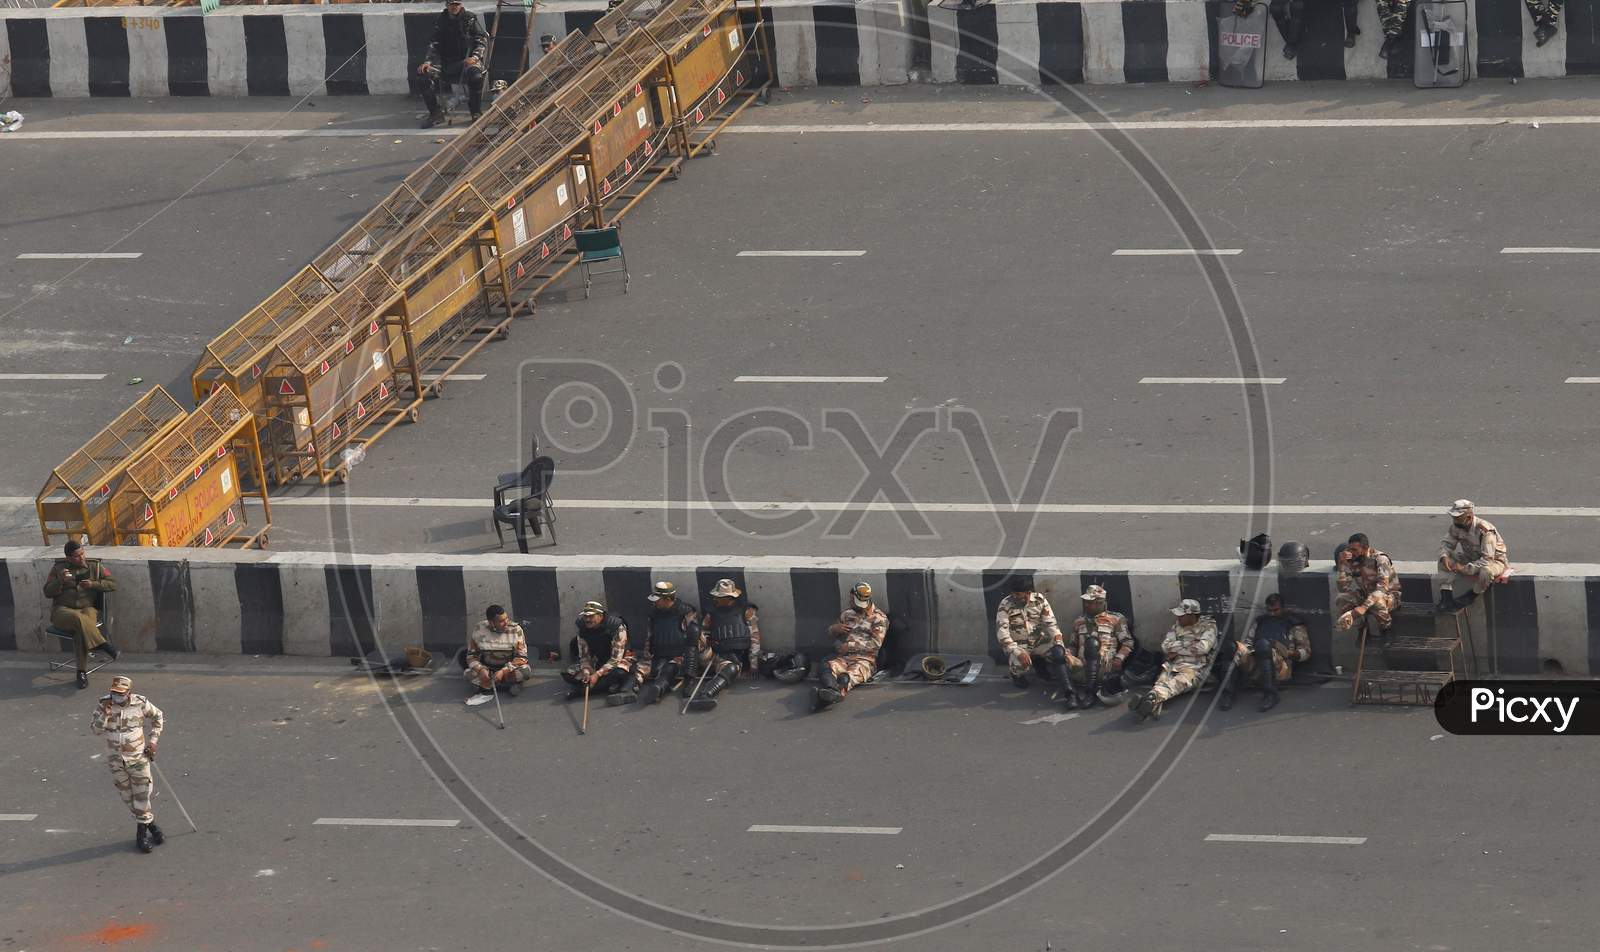 Policemen sit near the barricades as farmers continue their protest against the central government's recent agricultural reforms at Delhi-Uttar Pradesh border in Ghaziabad on February 2, 2021.